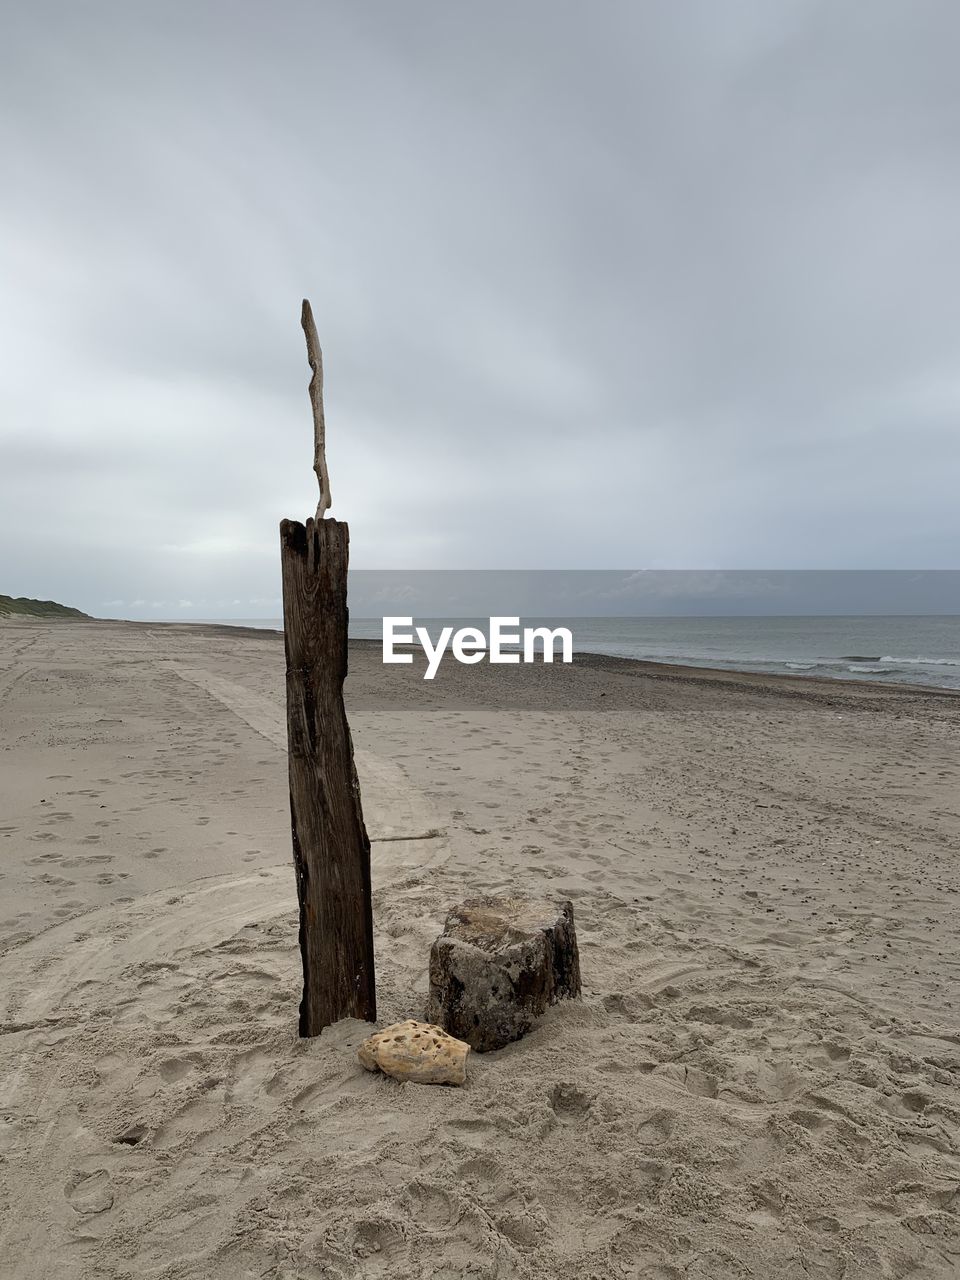 DRIFTWOOD ON WOODEN POST AT BEACH AGAINST SKY